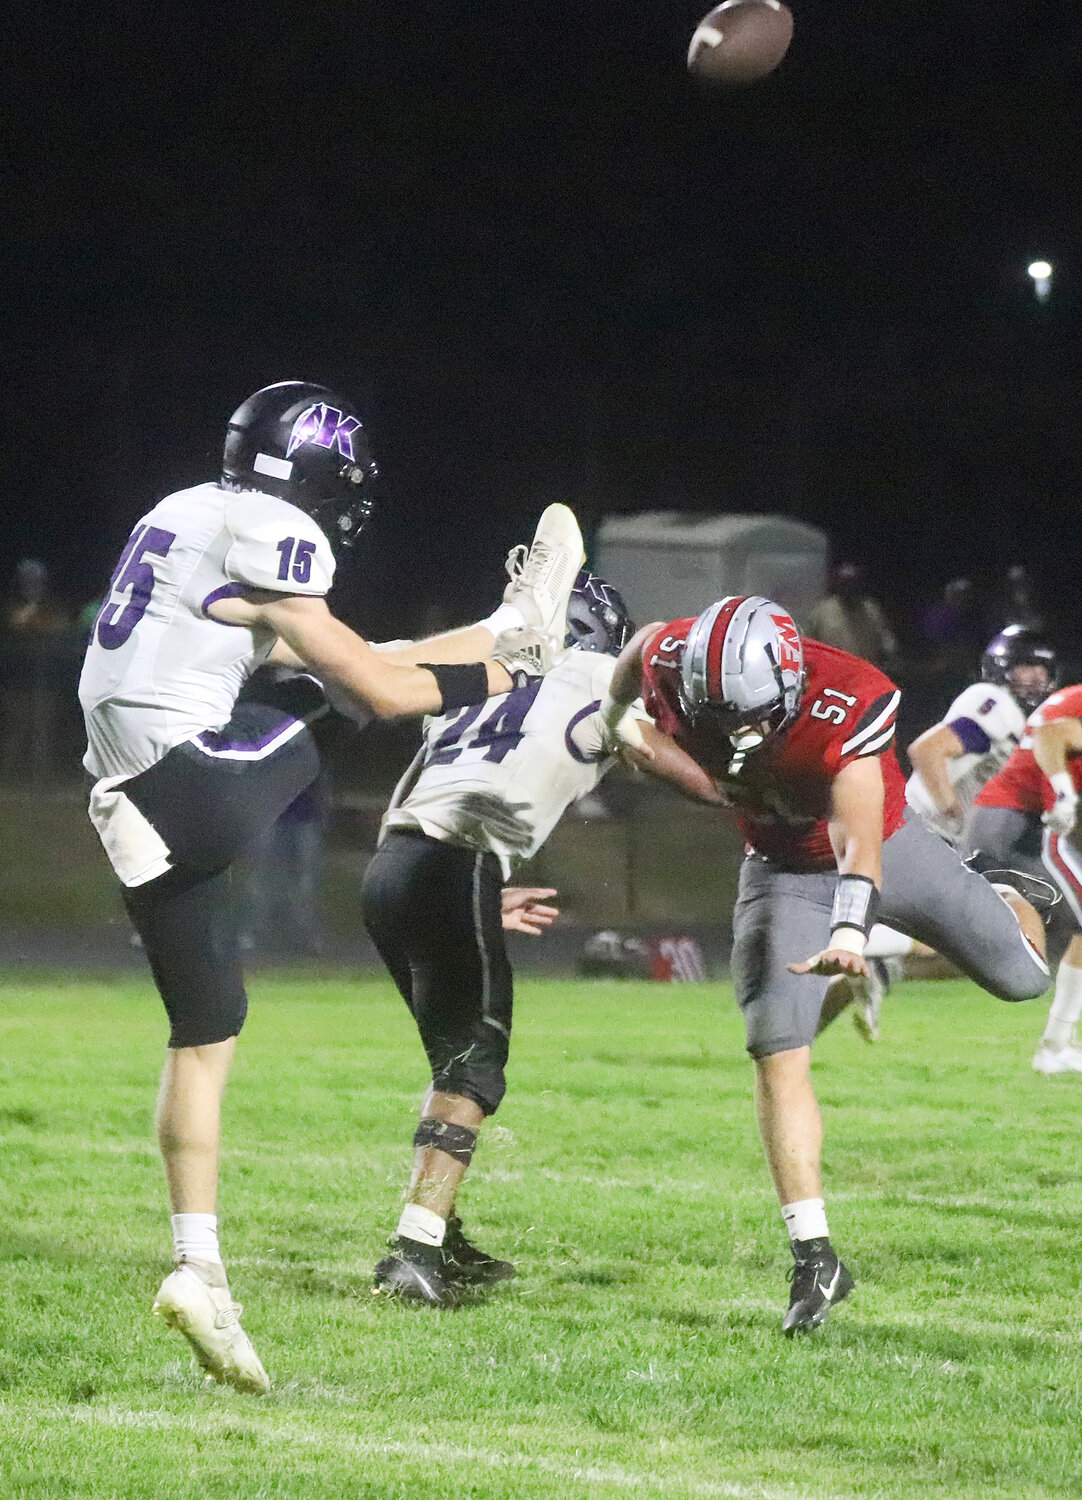 The Hounds' Justin Maitner just misses getting a hand on a punt in the fourth quarter Friday night in Fort Madison.